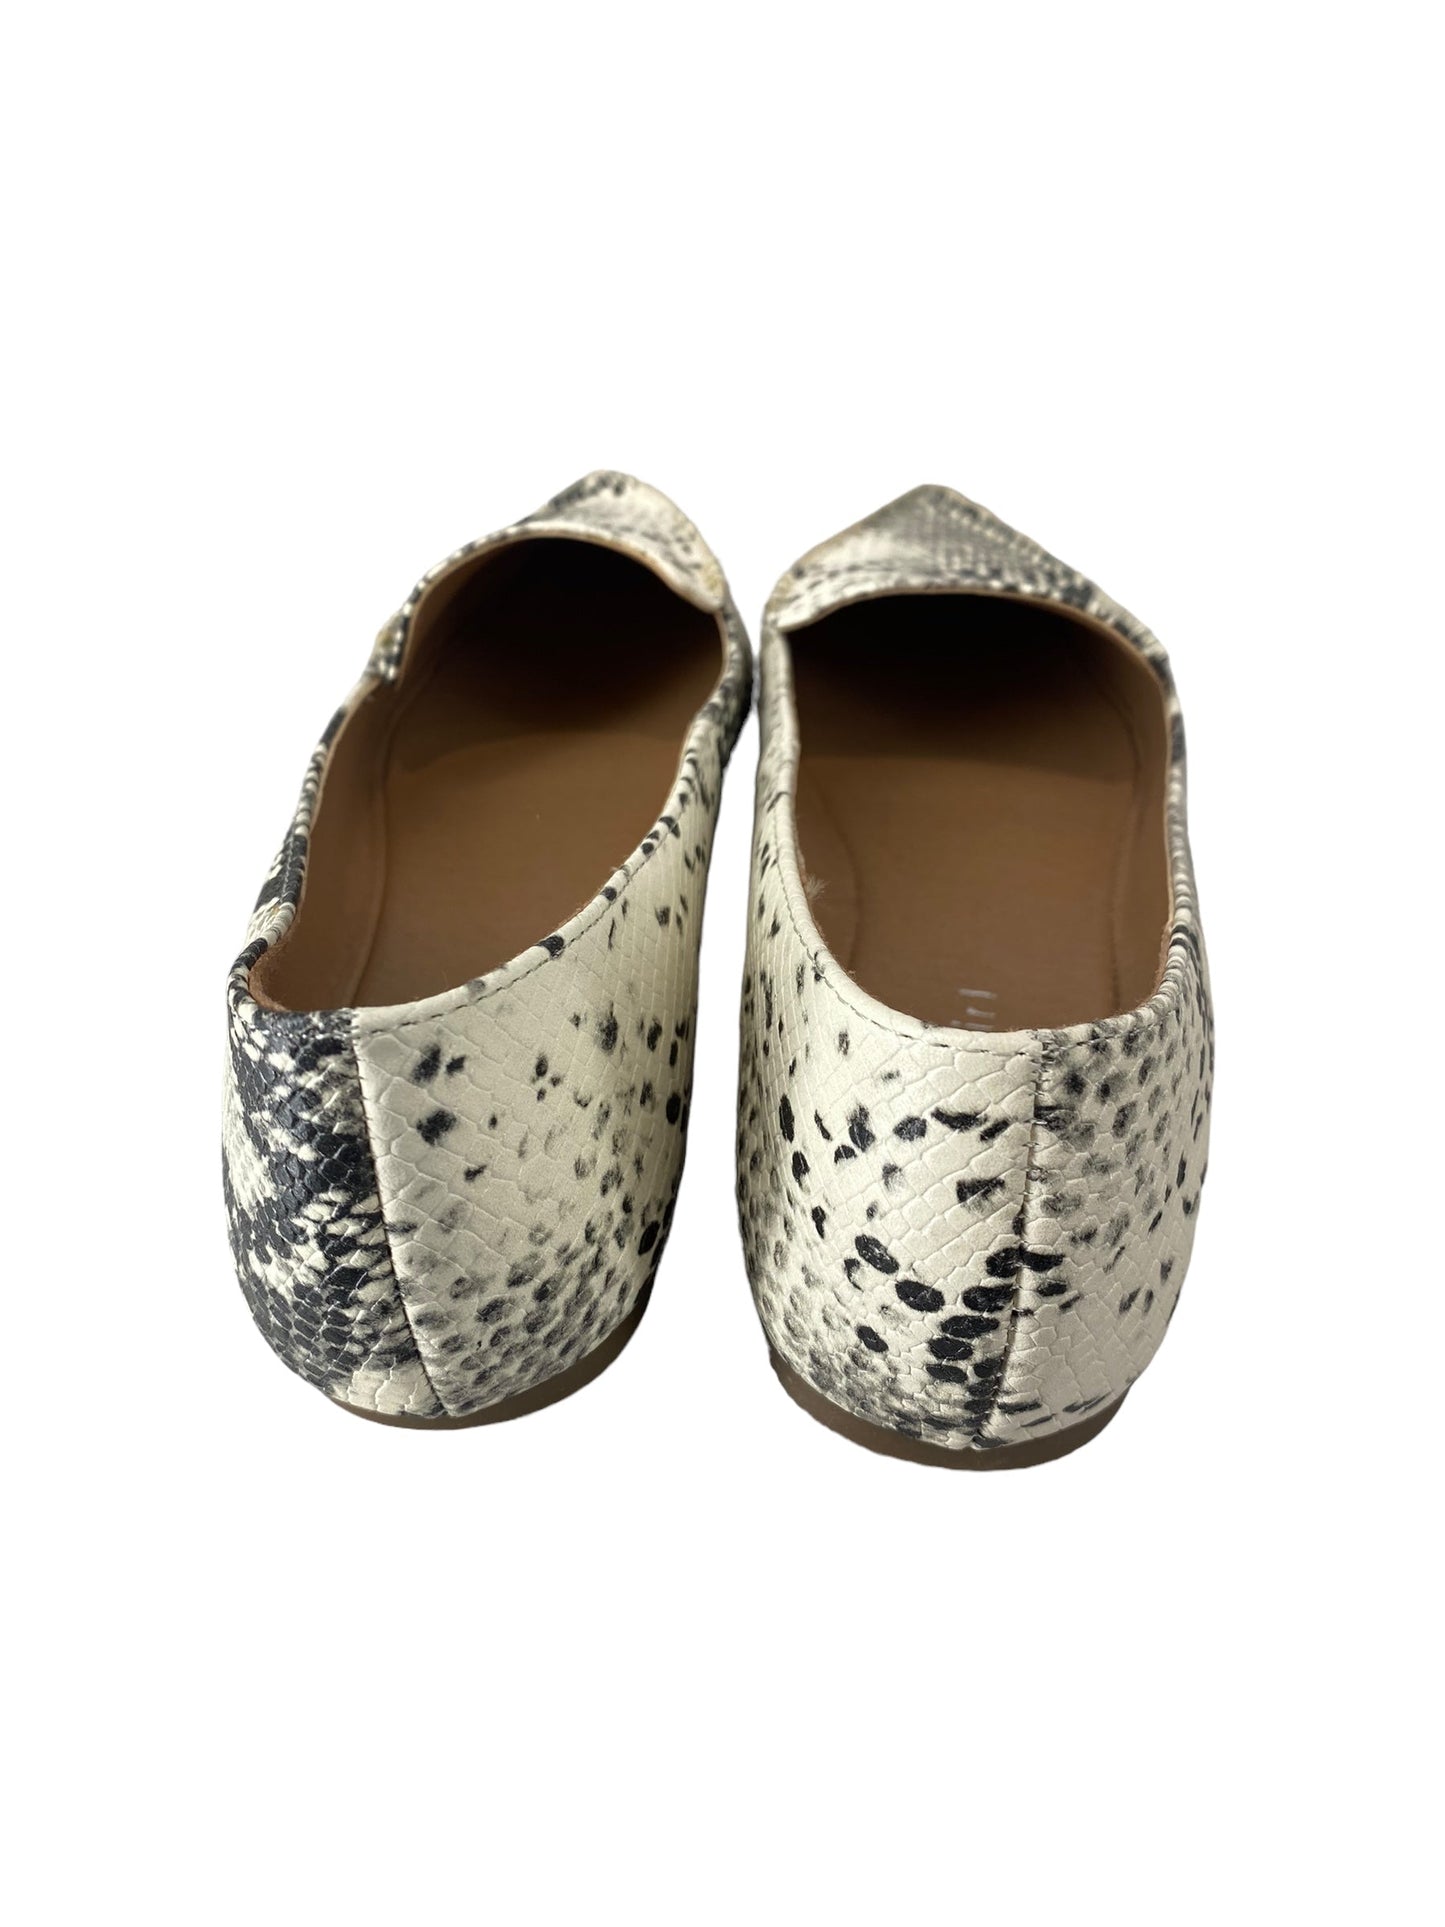 Animal Print Shoes Flats Madden Girl, Size 7.5